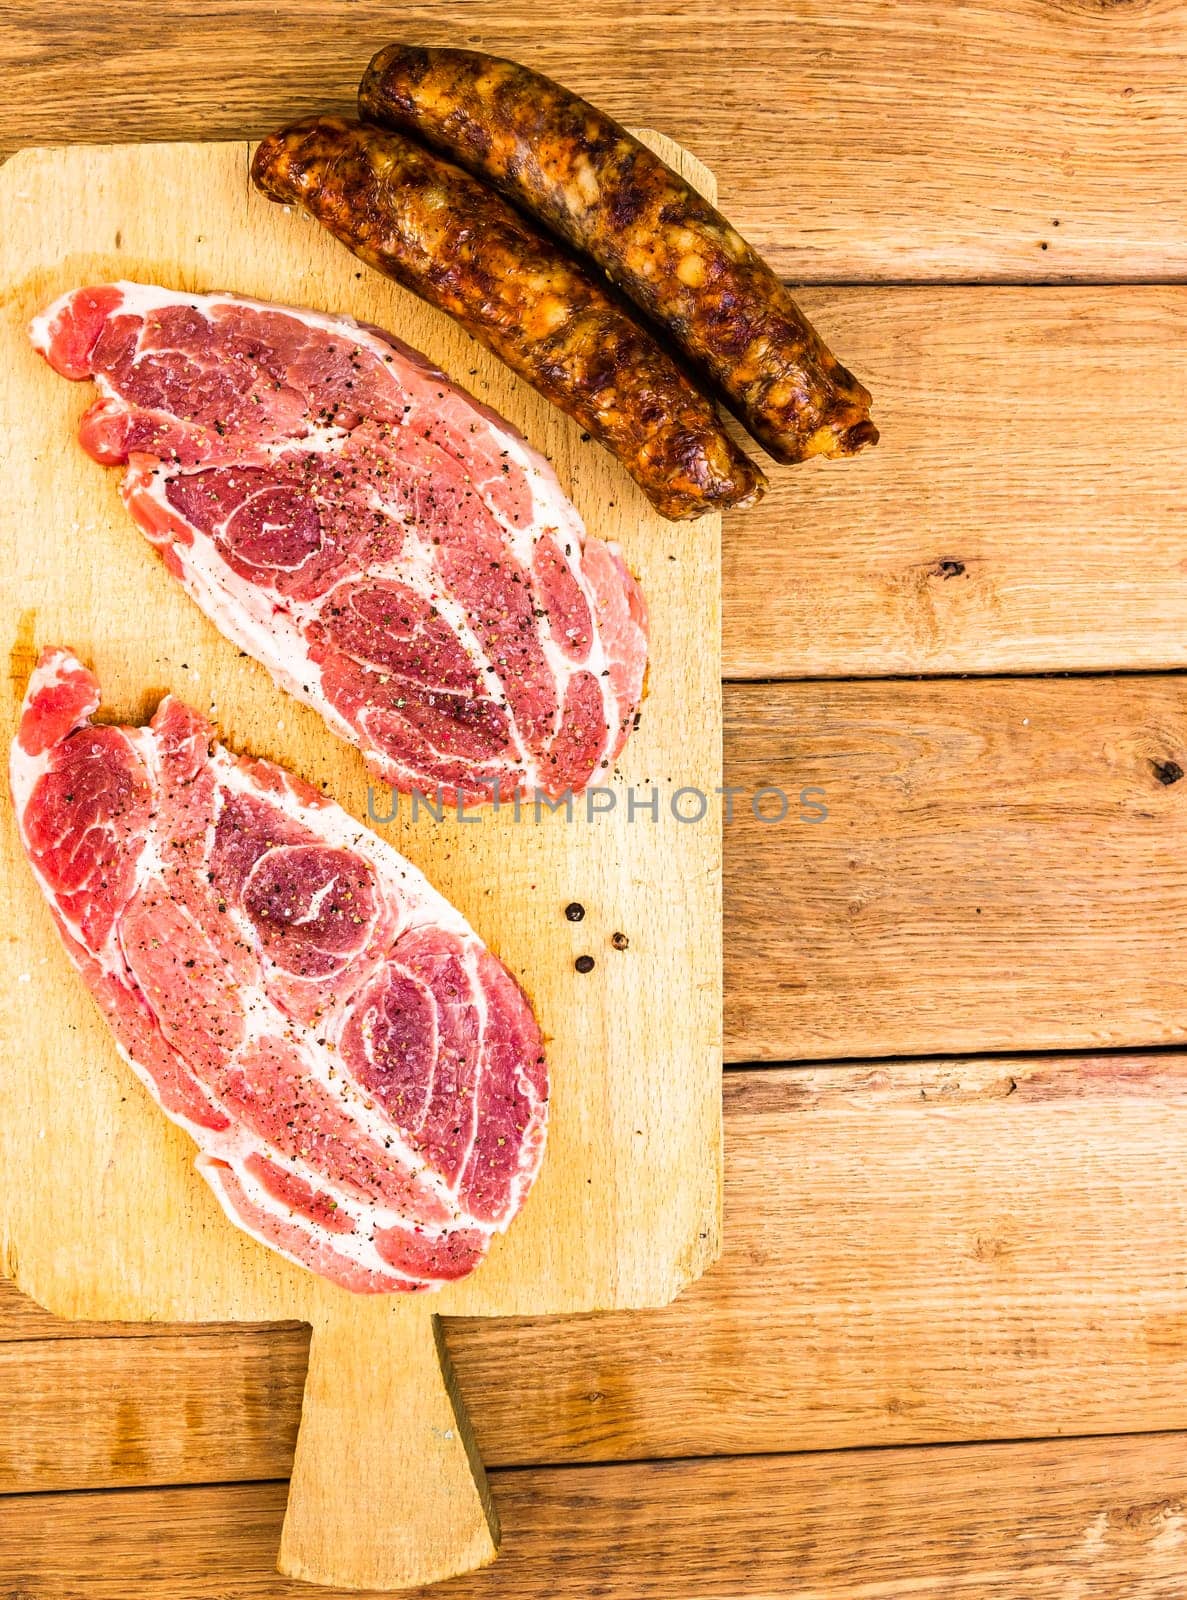 Pork chops with condiments and smoked sausage on a wooden cutting board over wooden table, meat for bbq, top view, copy space, barbeque concept by vladispas